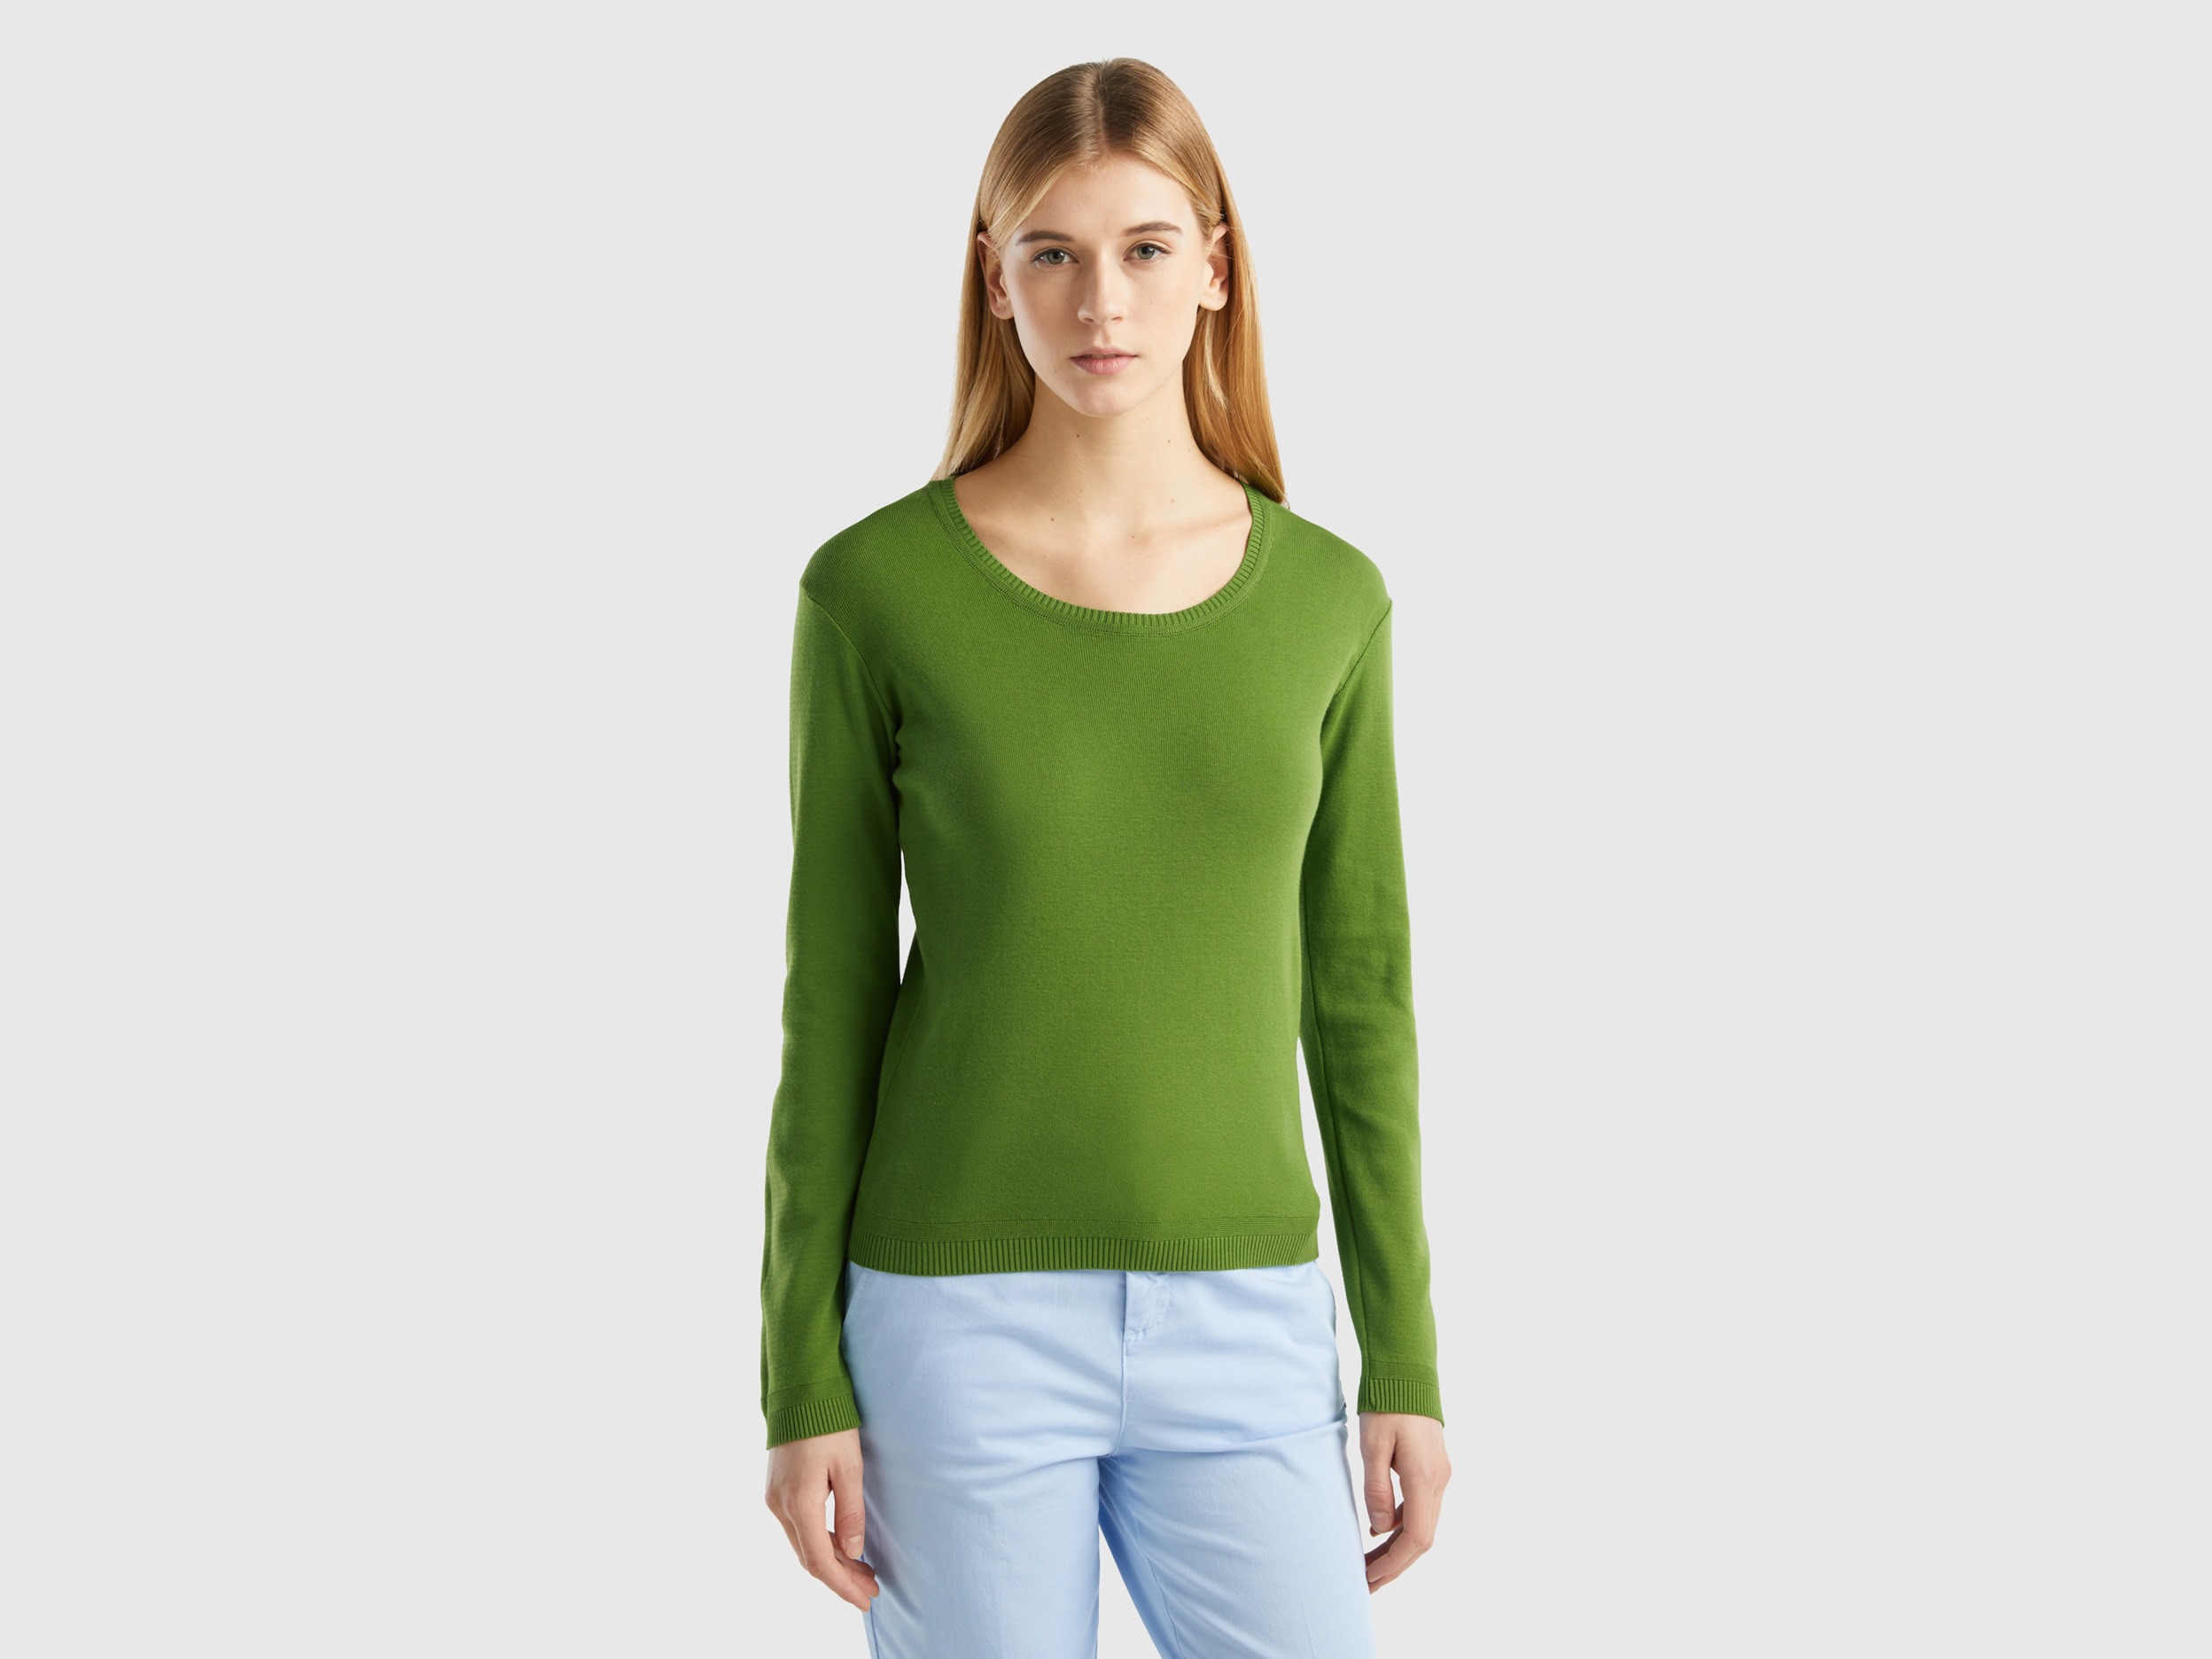 Benetton, Crew Neck Sweater In Pure Cotton, size S, Military Green, Women